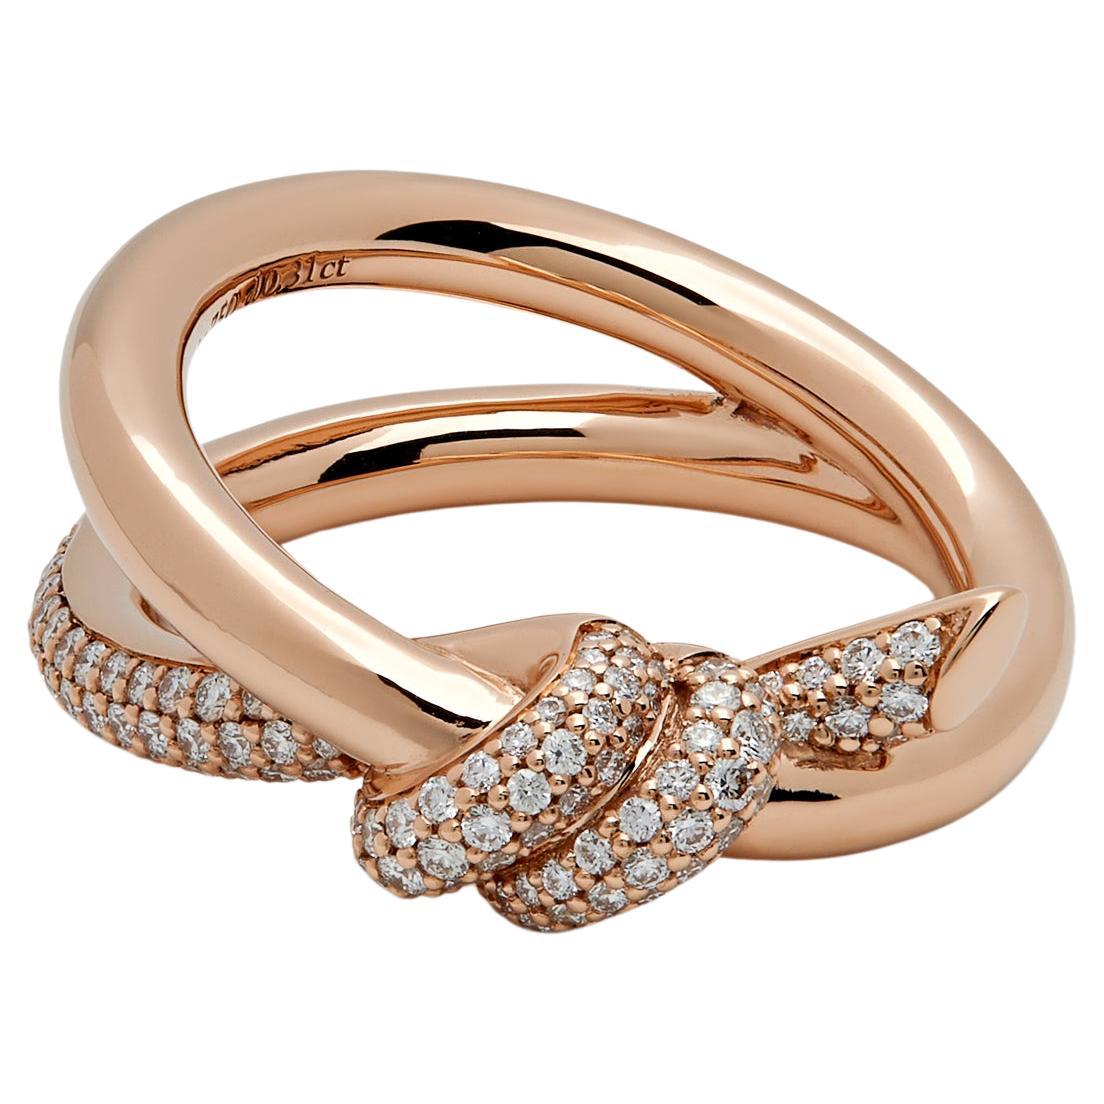 Tiffany & Co. Knot Double Row Ring in Rose Gold with Diamonds 69683304 For Sale